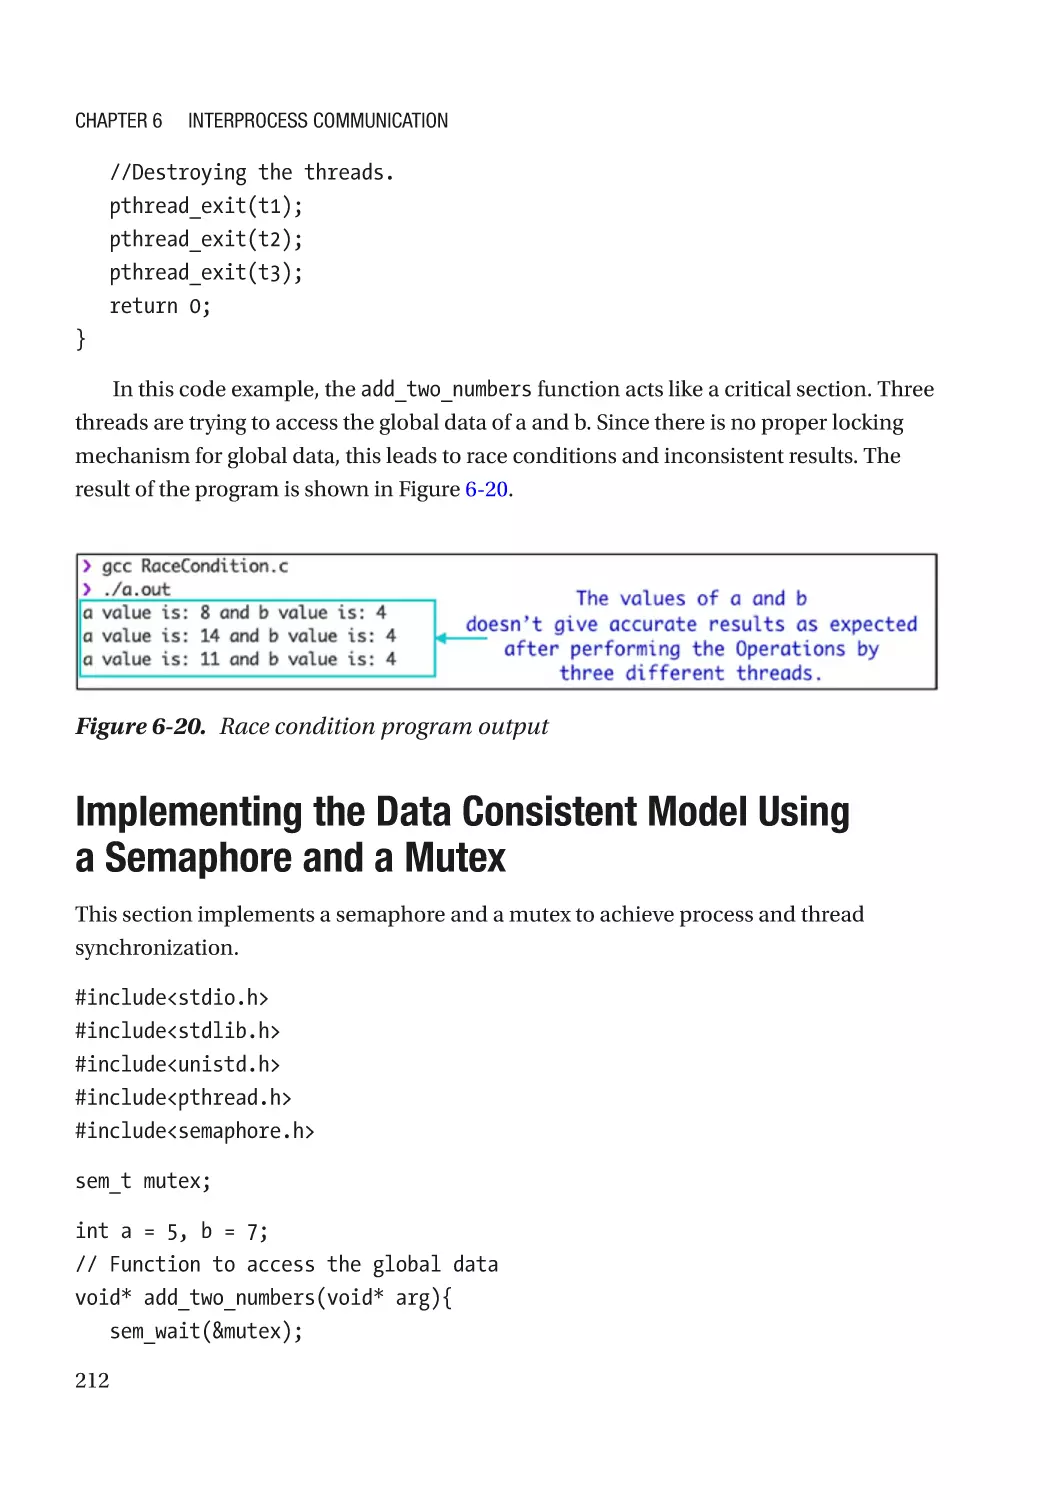 Implementing the Data Consistent Model Using a Semaphore and a Mutex